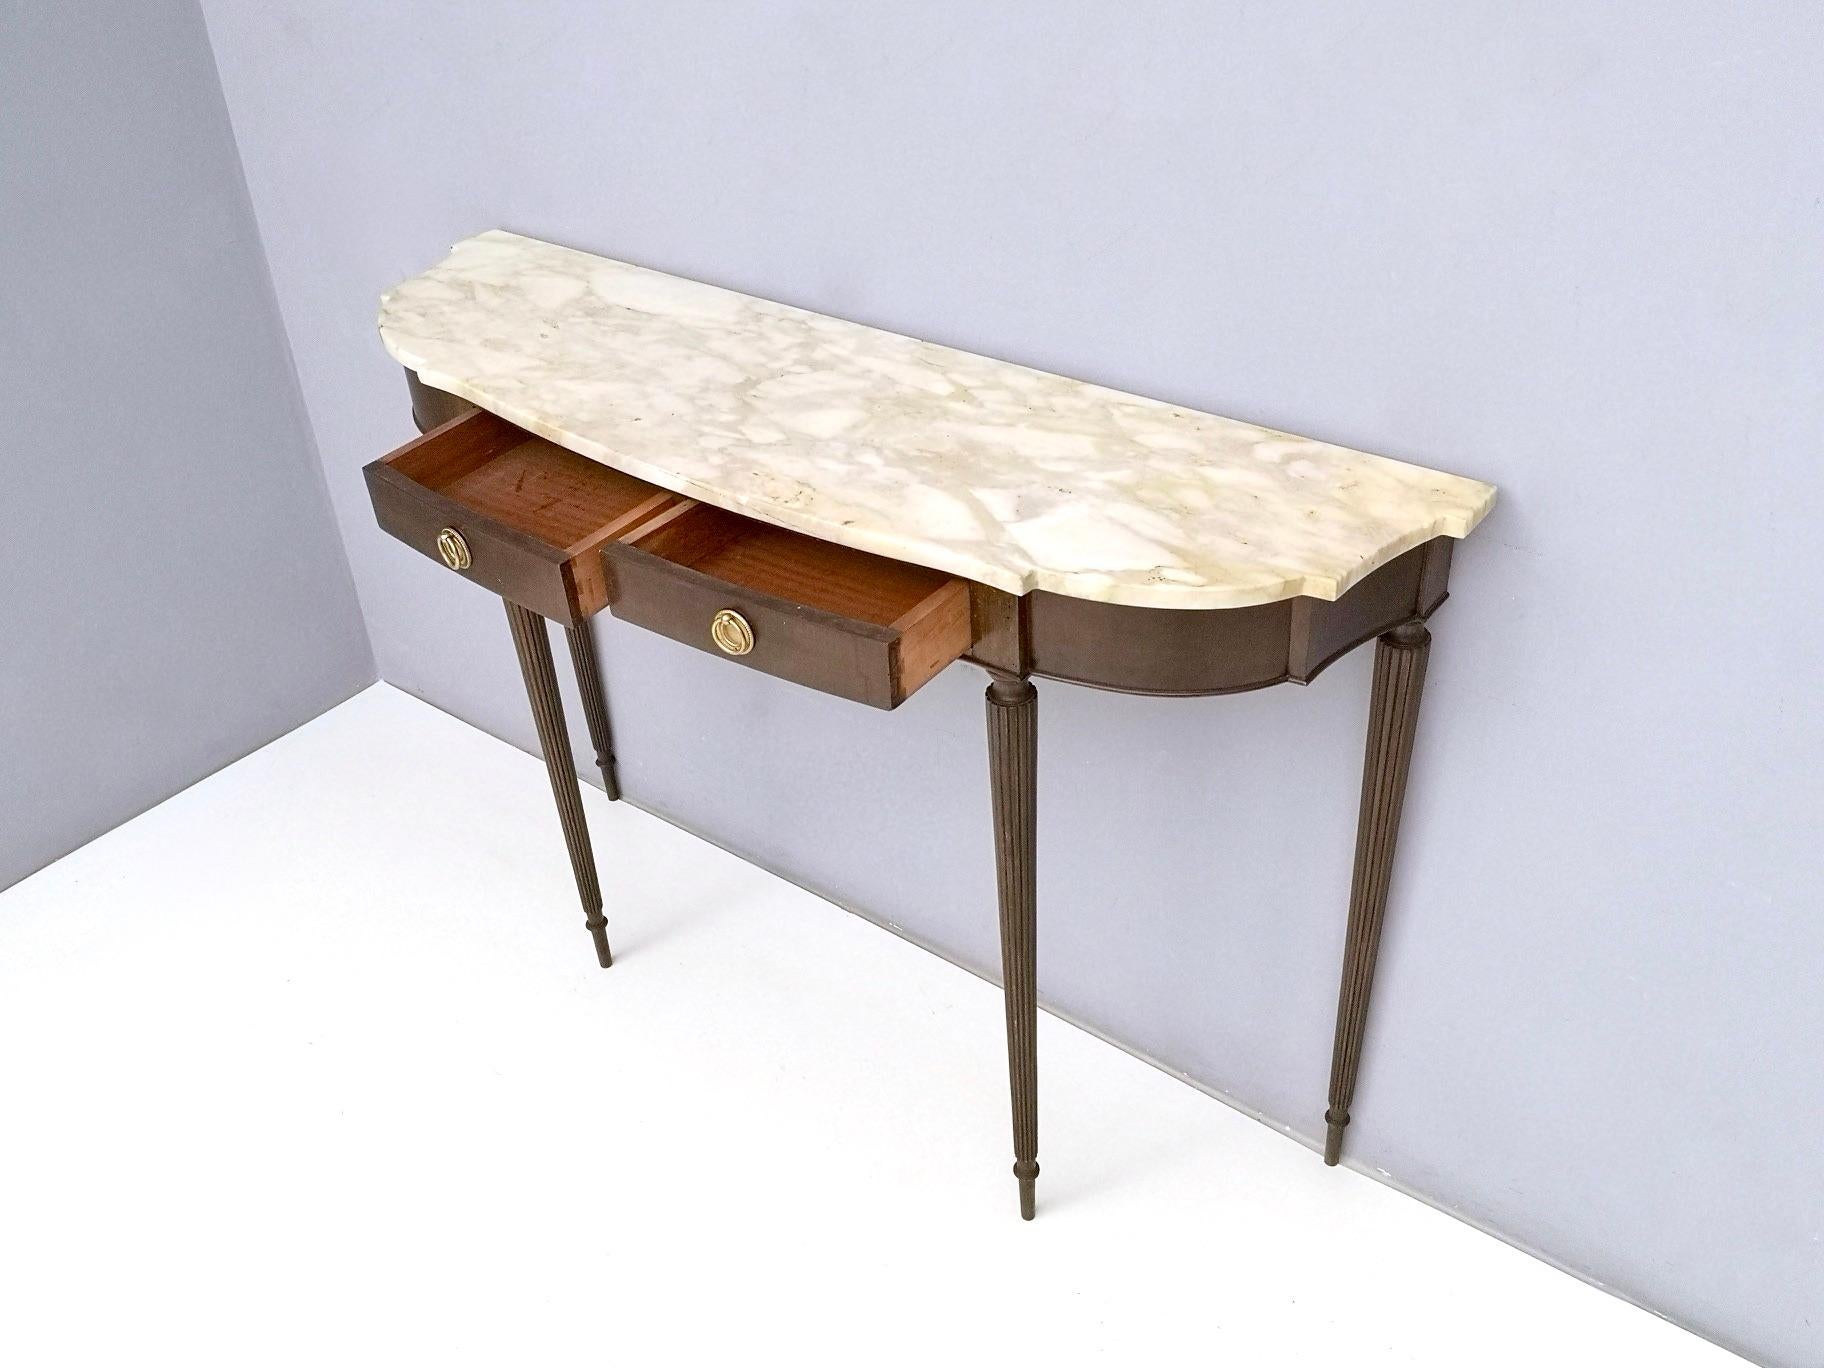 Bronze Ebonized Beech Console Table with a Marble Top, 1950s